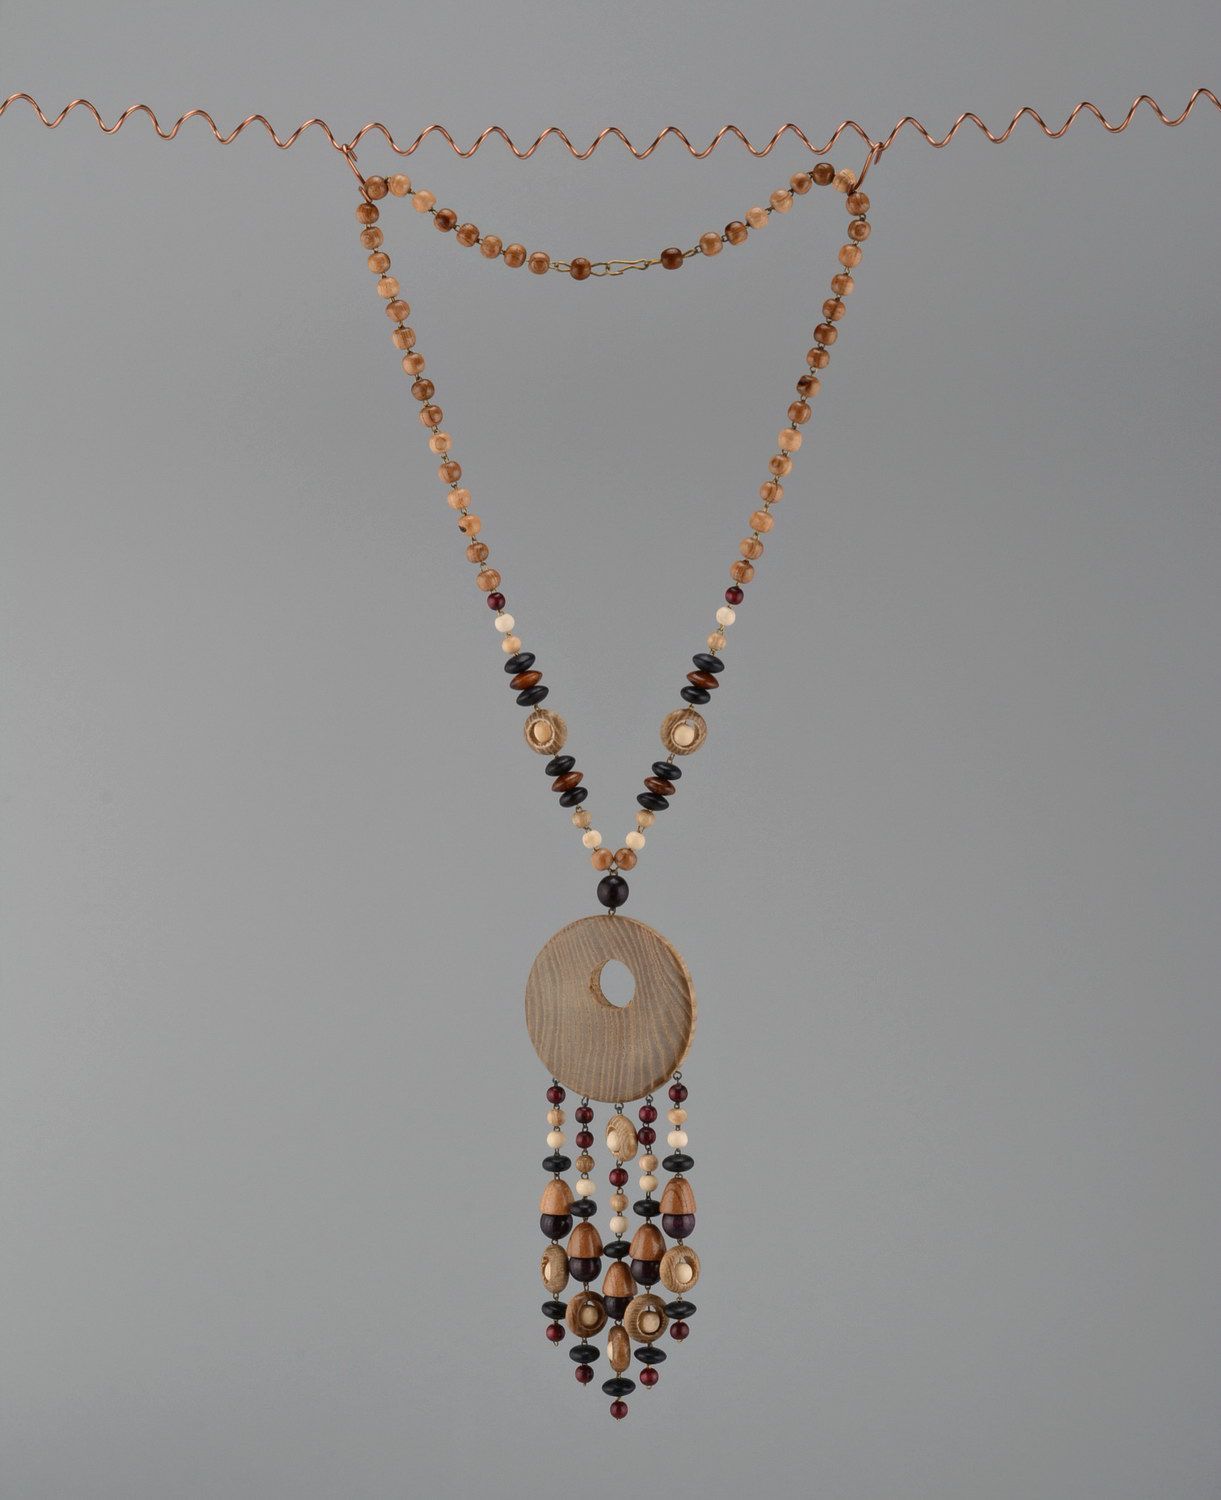 Long wooden necklace with clasp photo 1